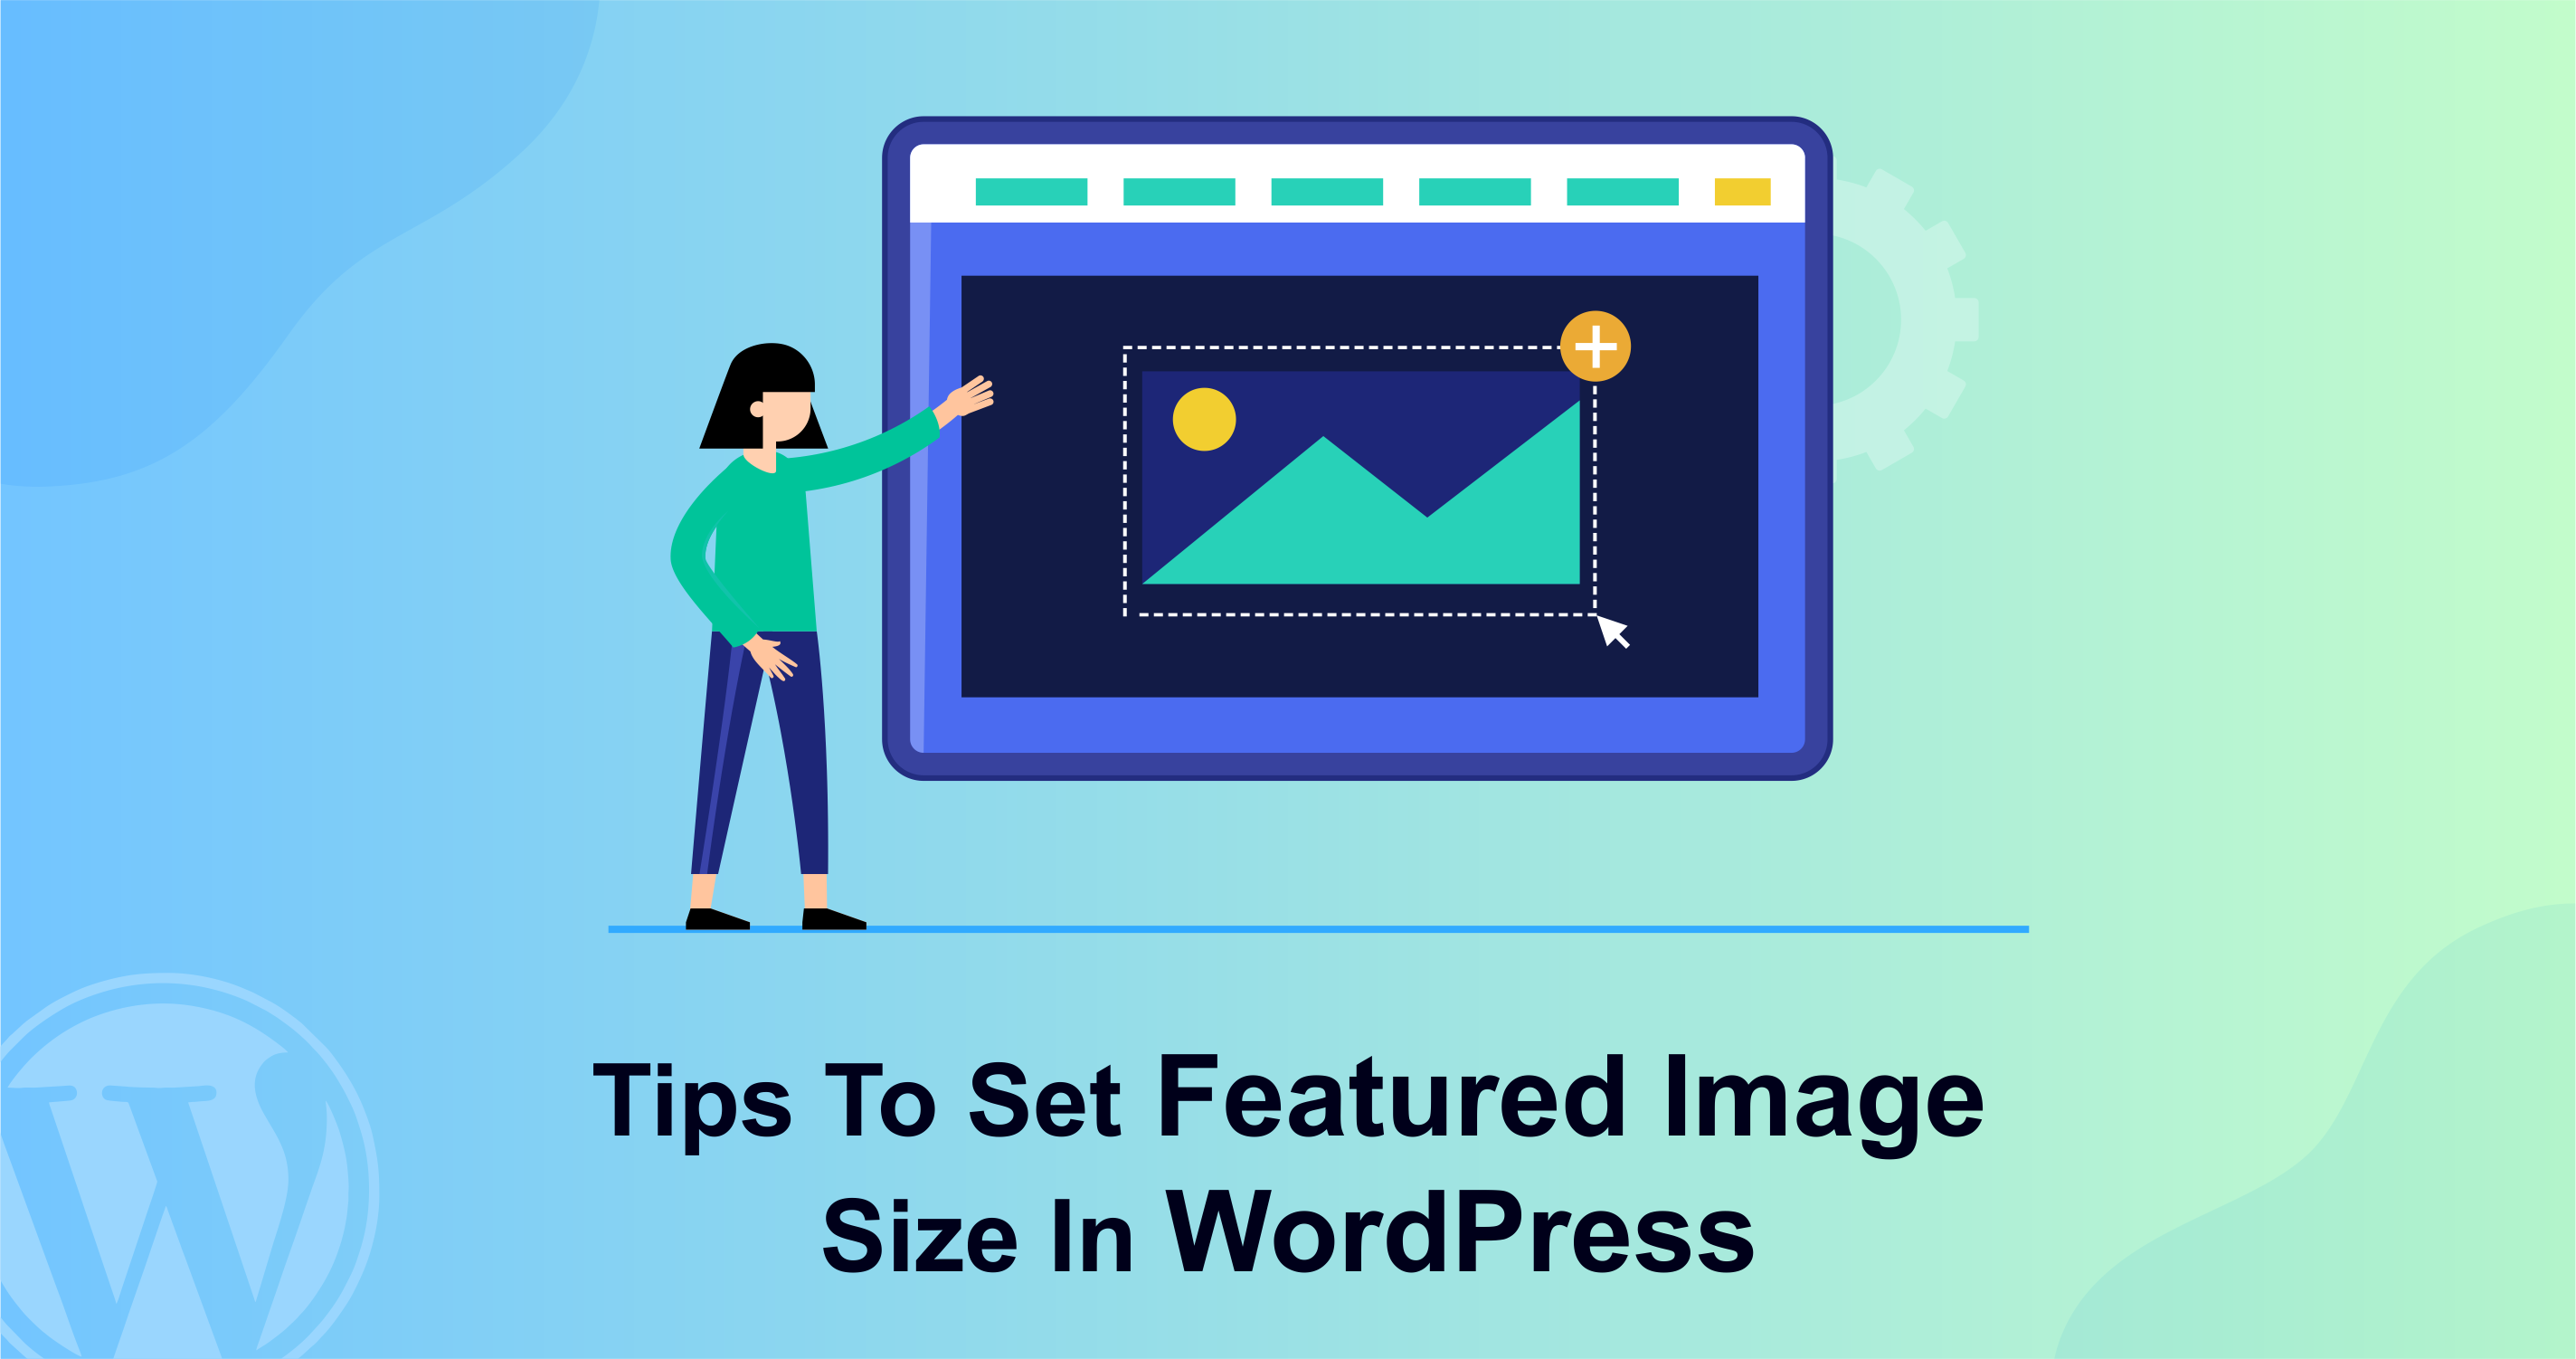 Tips to Set Featured Image Size in WordPress